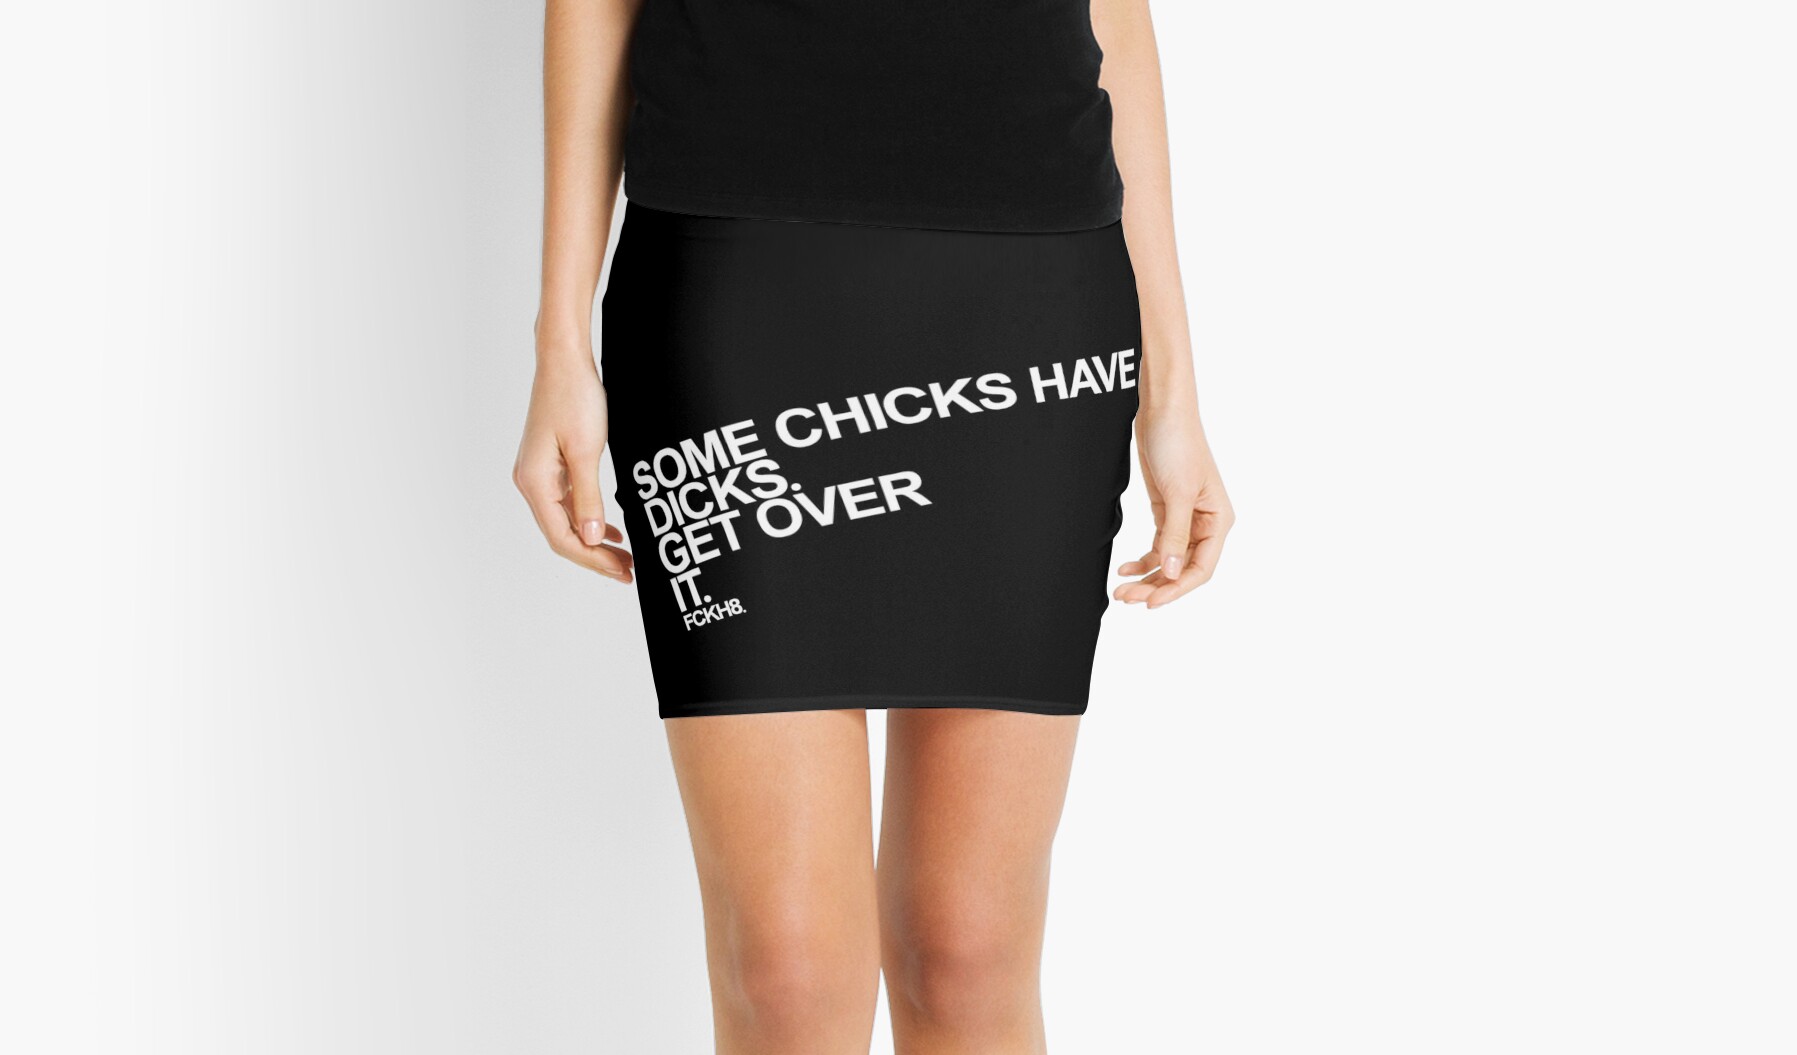 Some Chicks Have Dicks Get Over It Fckh8 Mini Skirt By Chaoticrainbow Redbubble 8100